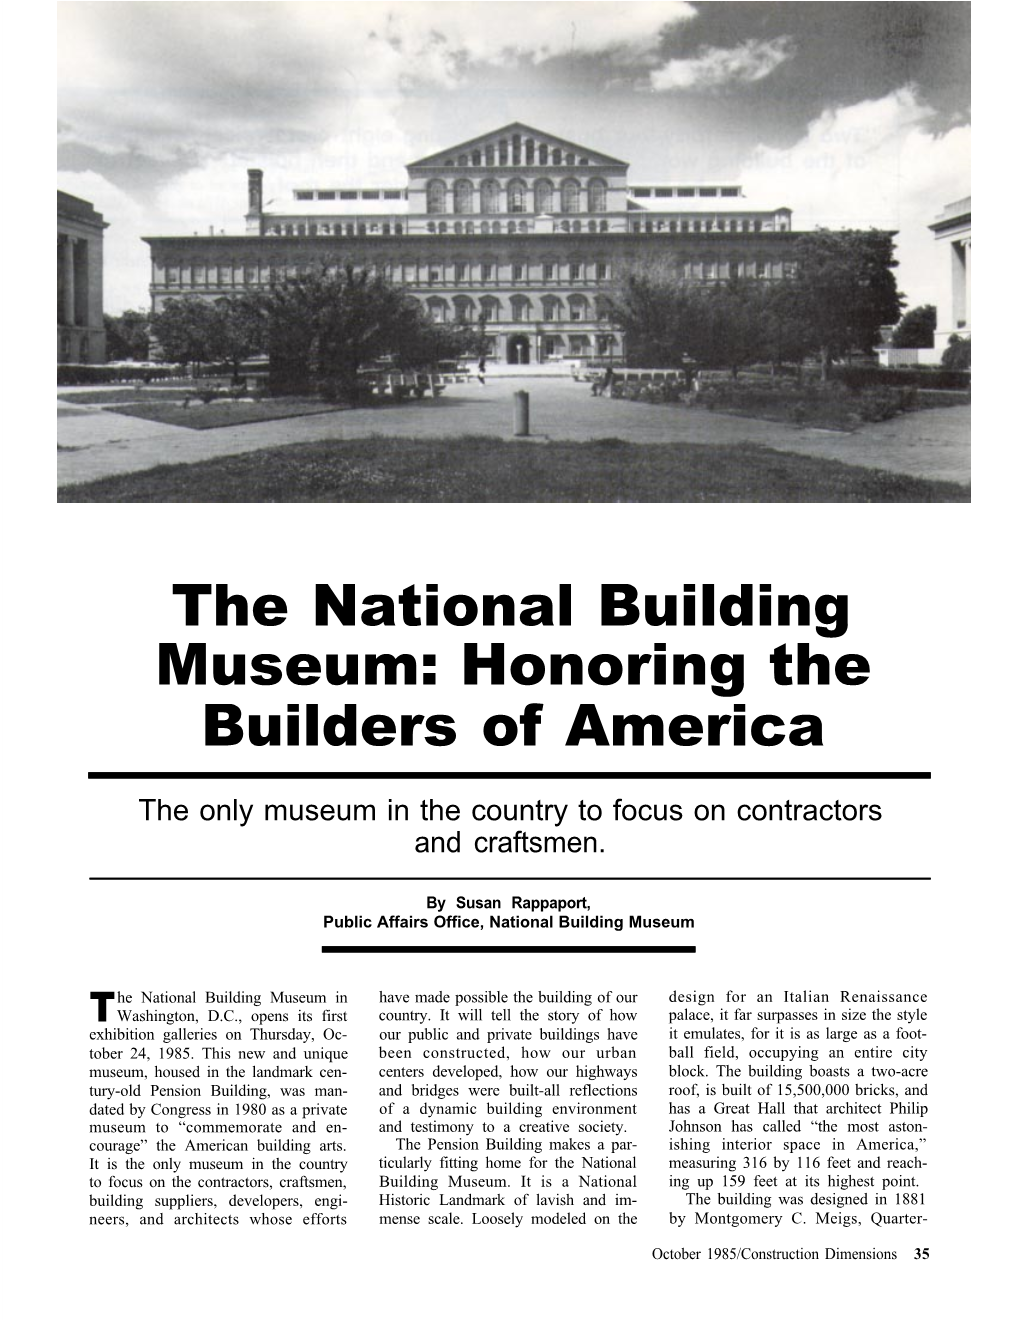 The National Building Museum: Honoring the Builders of America